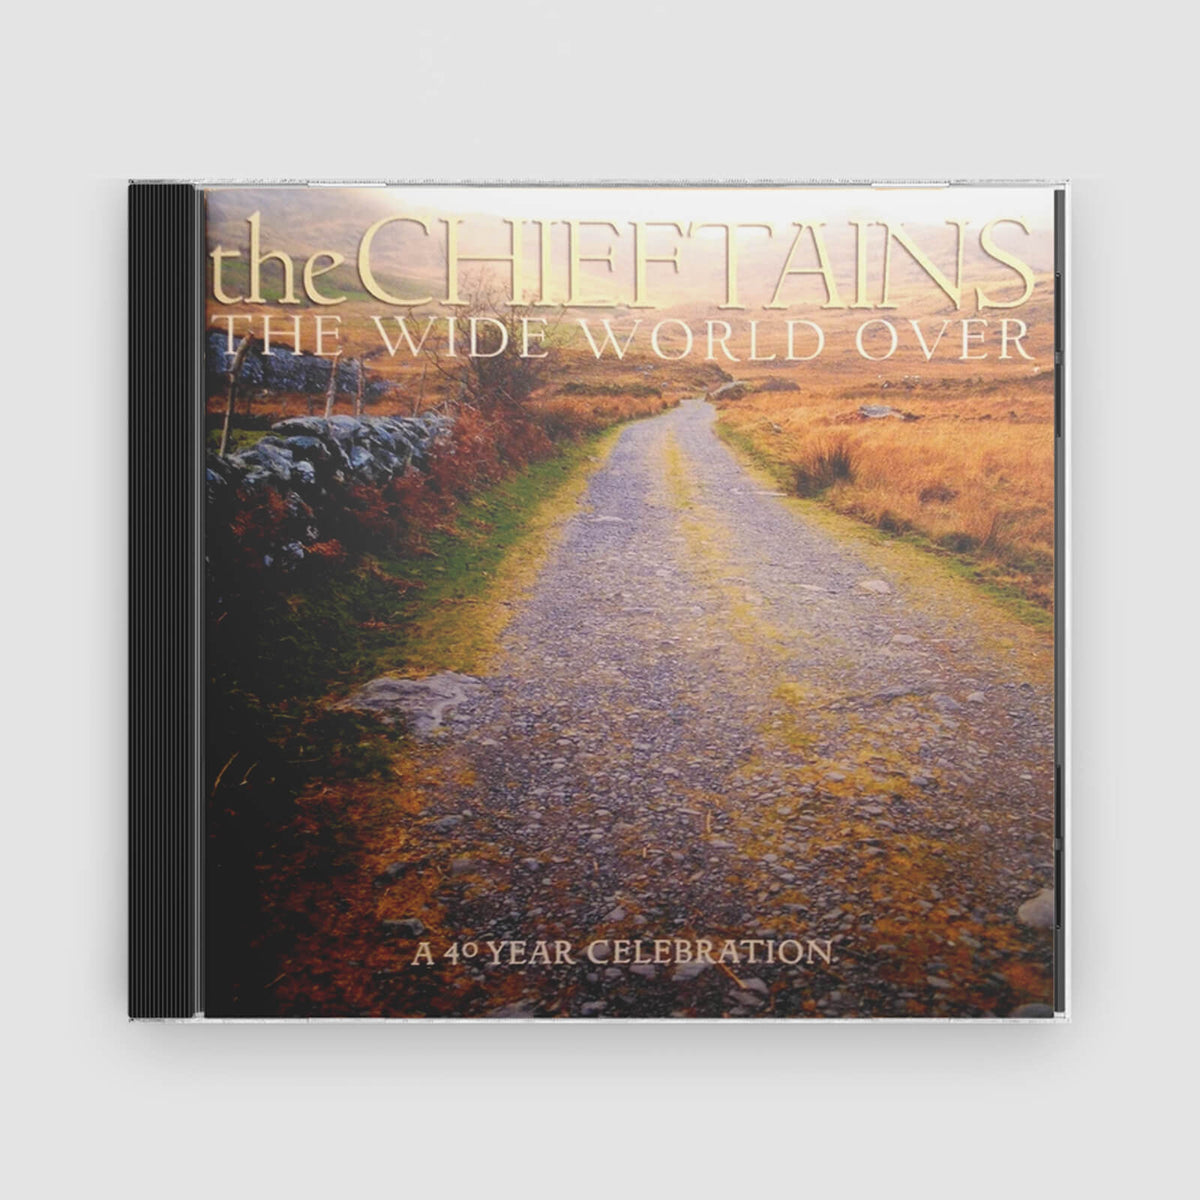 The Chieftains : The Wide World Over